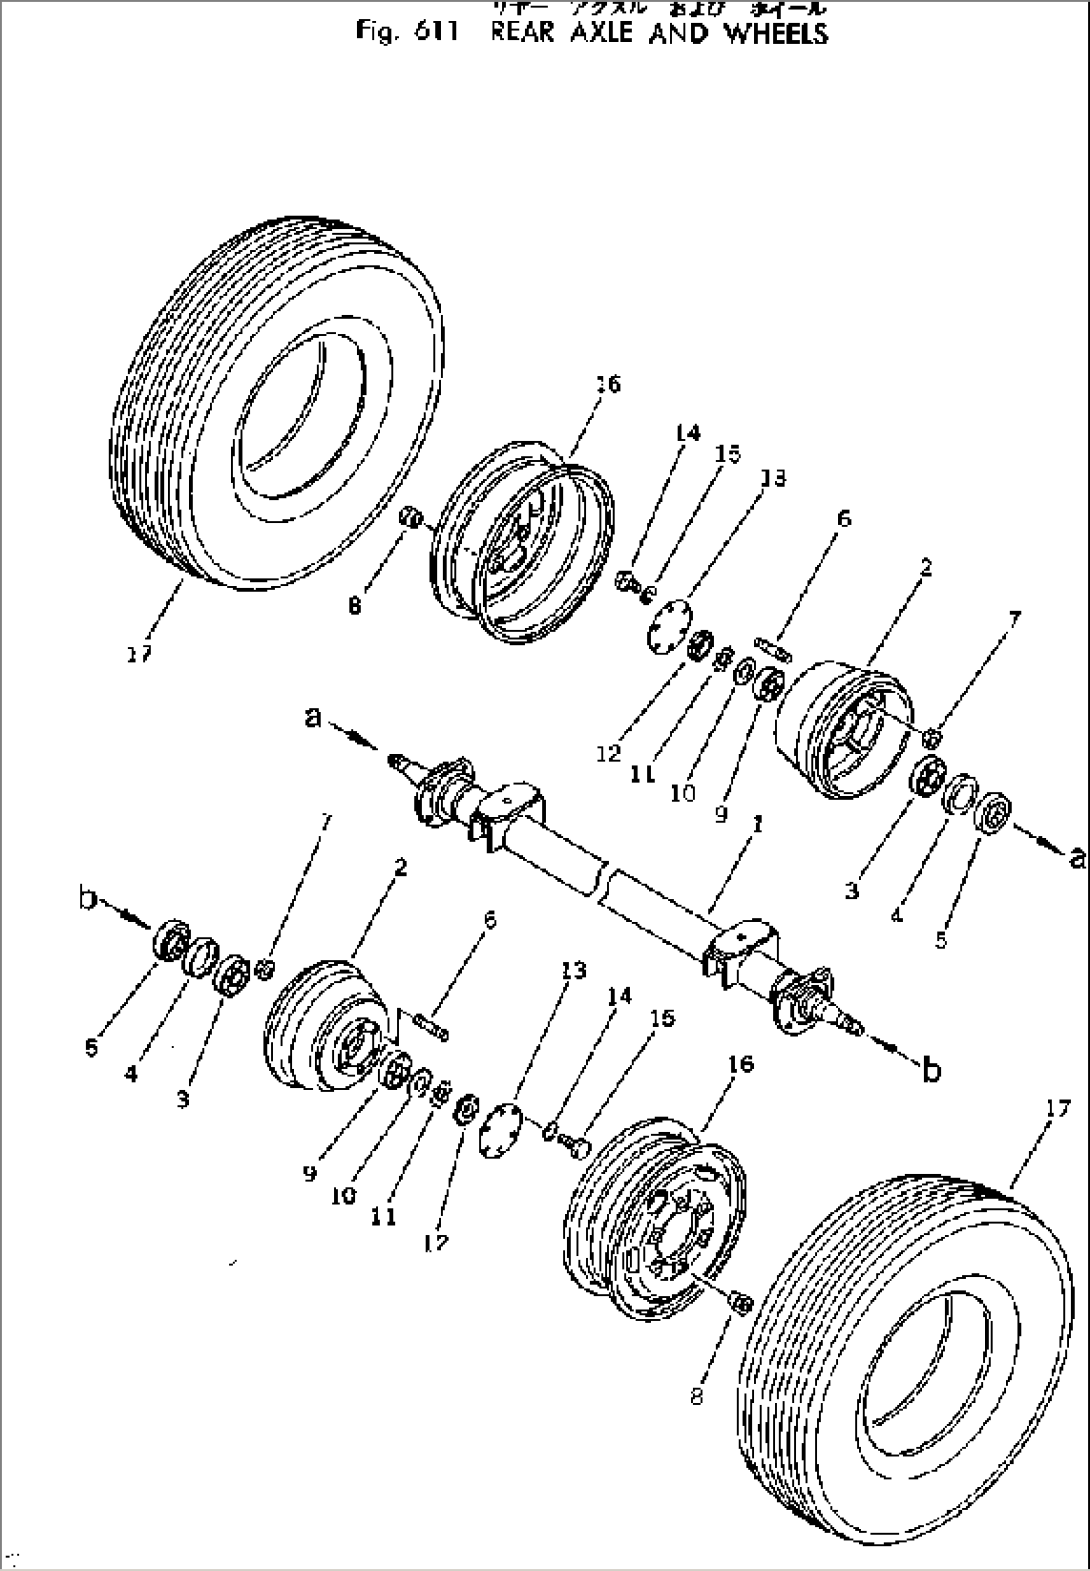 REAR AXLE AND WHEELS